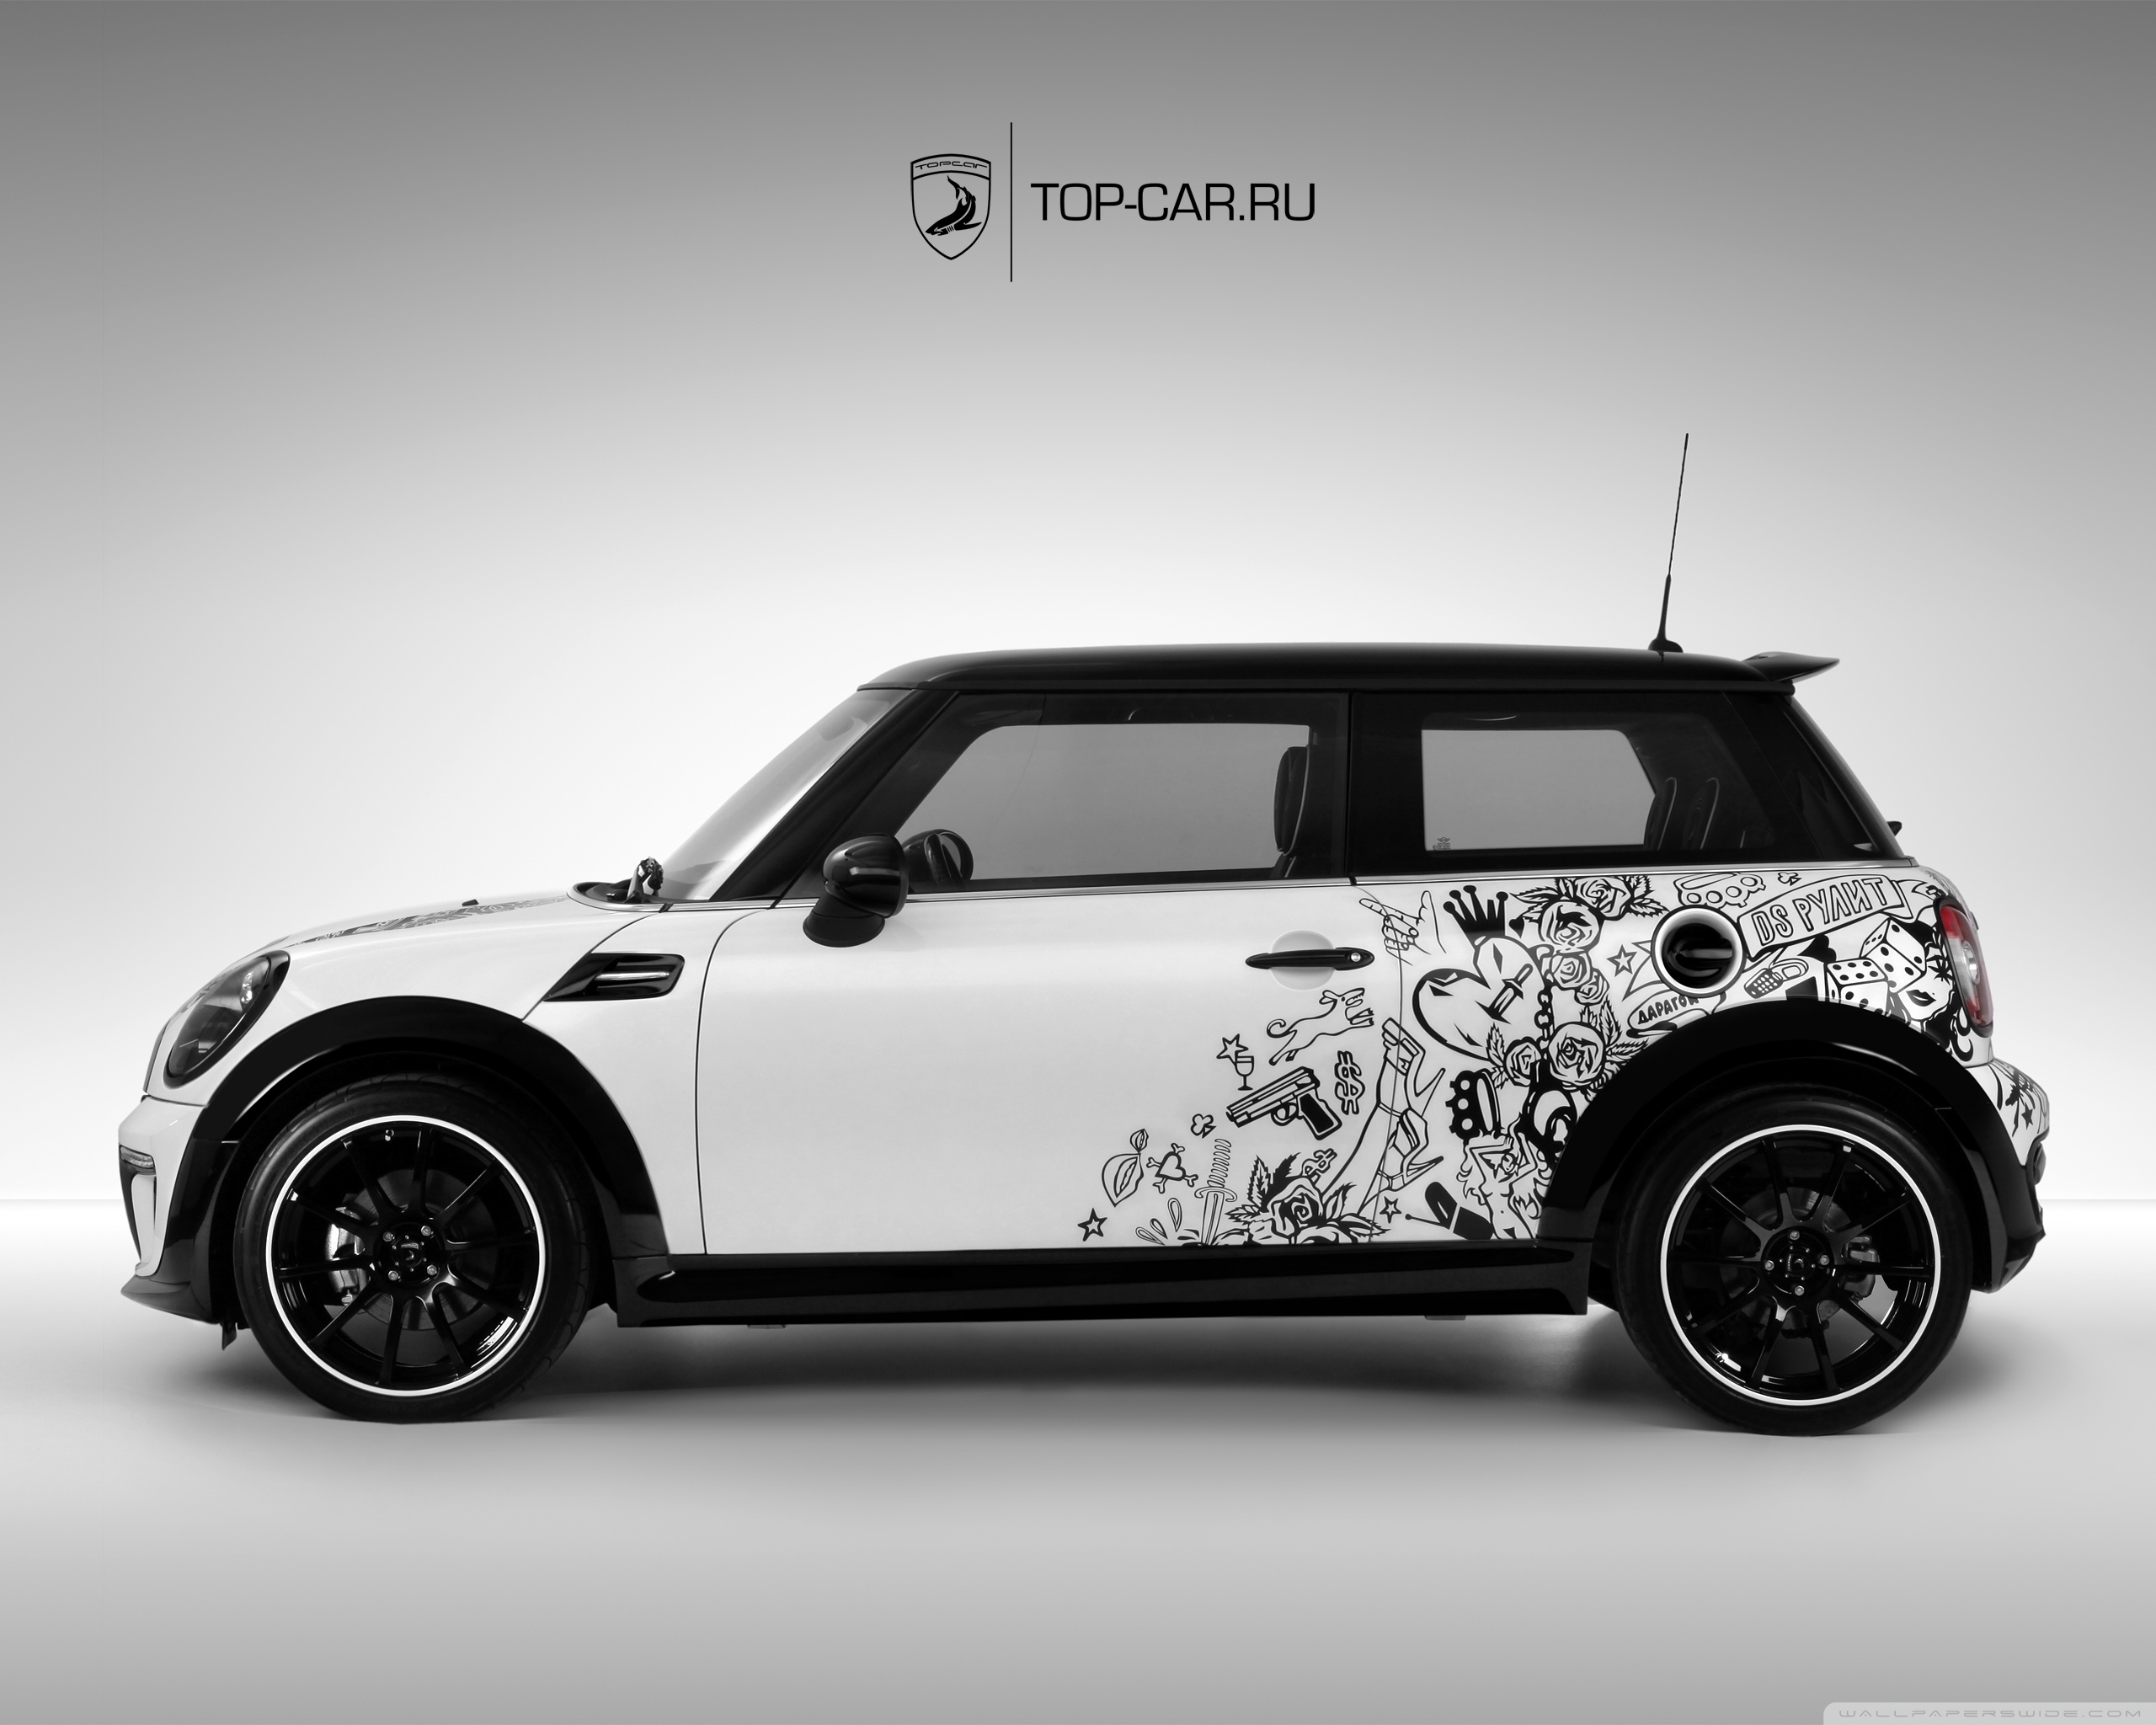 Mini Cooper Hd For Mobile Wallpapers